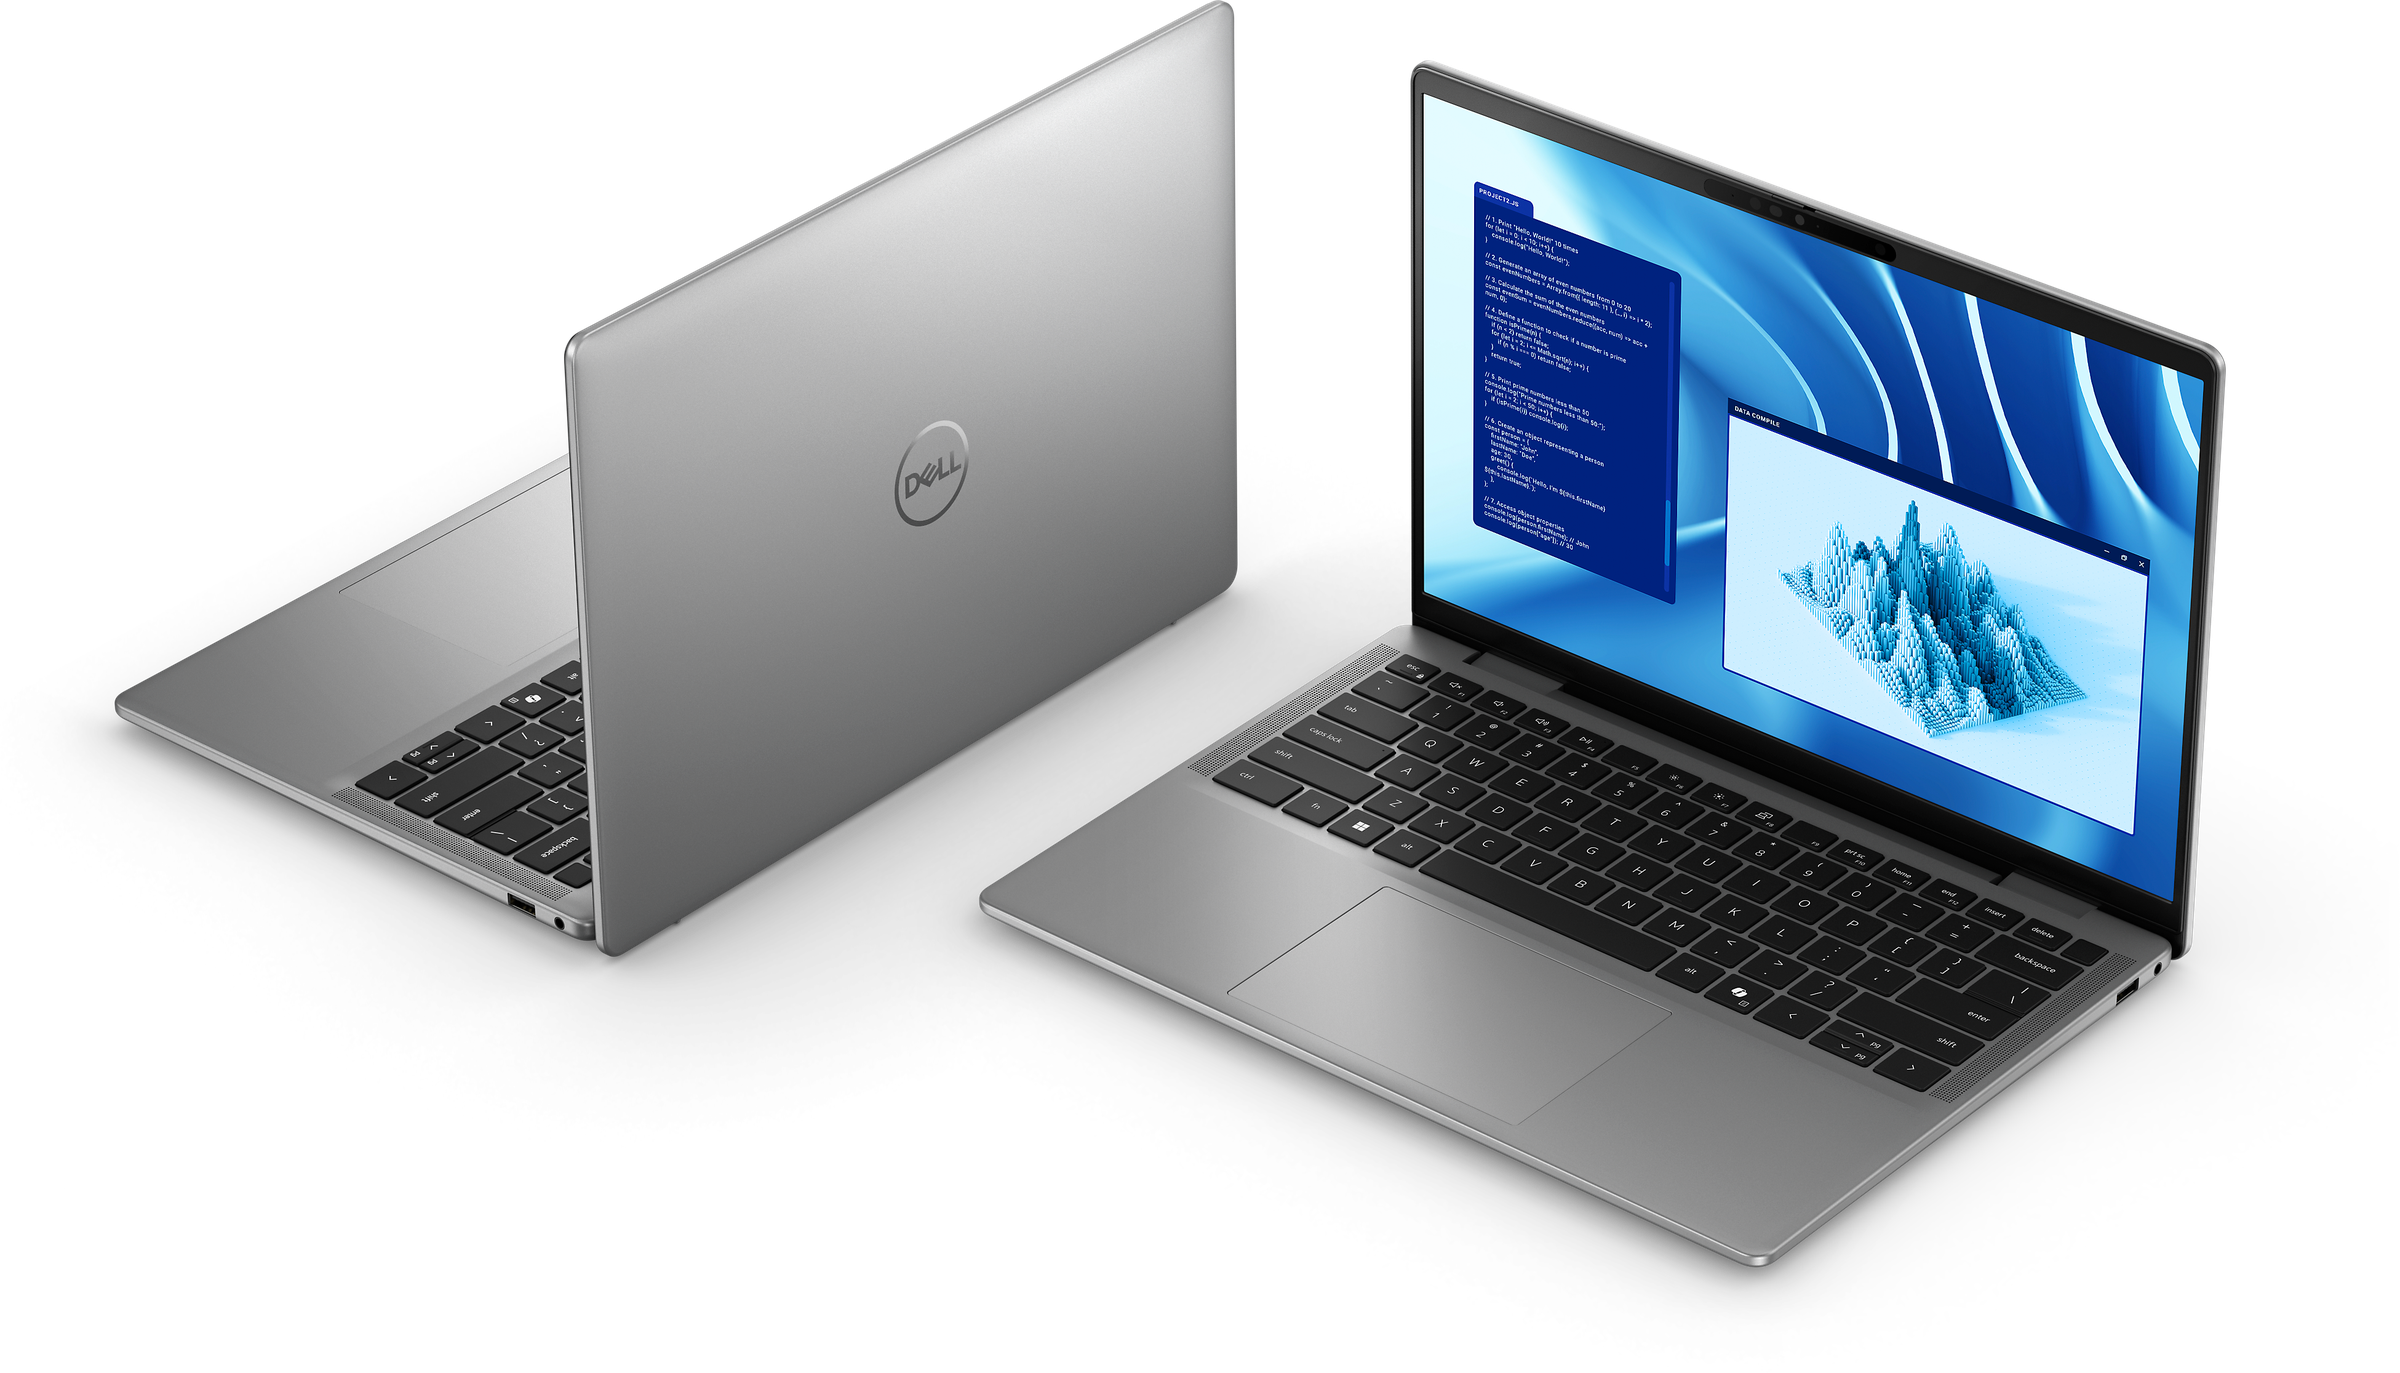 An open and powered on laptop with a blue wallpaper